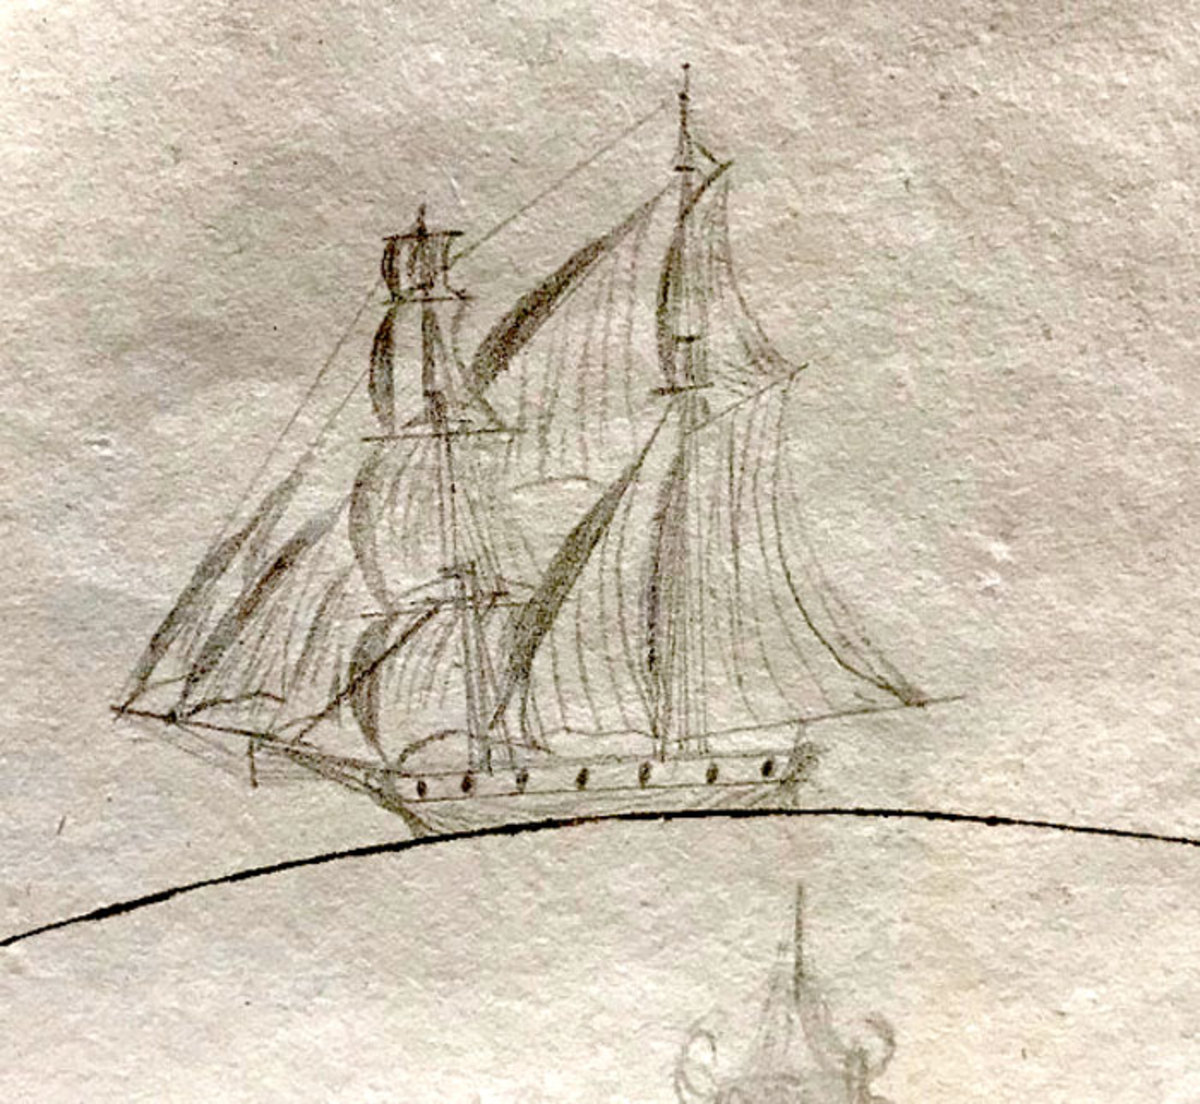 Sketch of brig Industry found inside an 1828 logbook for the brig.